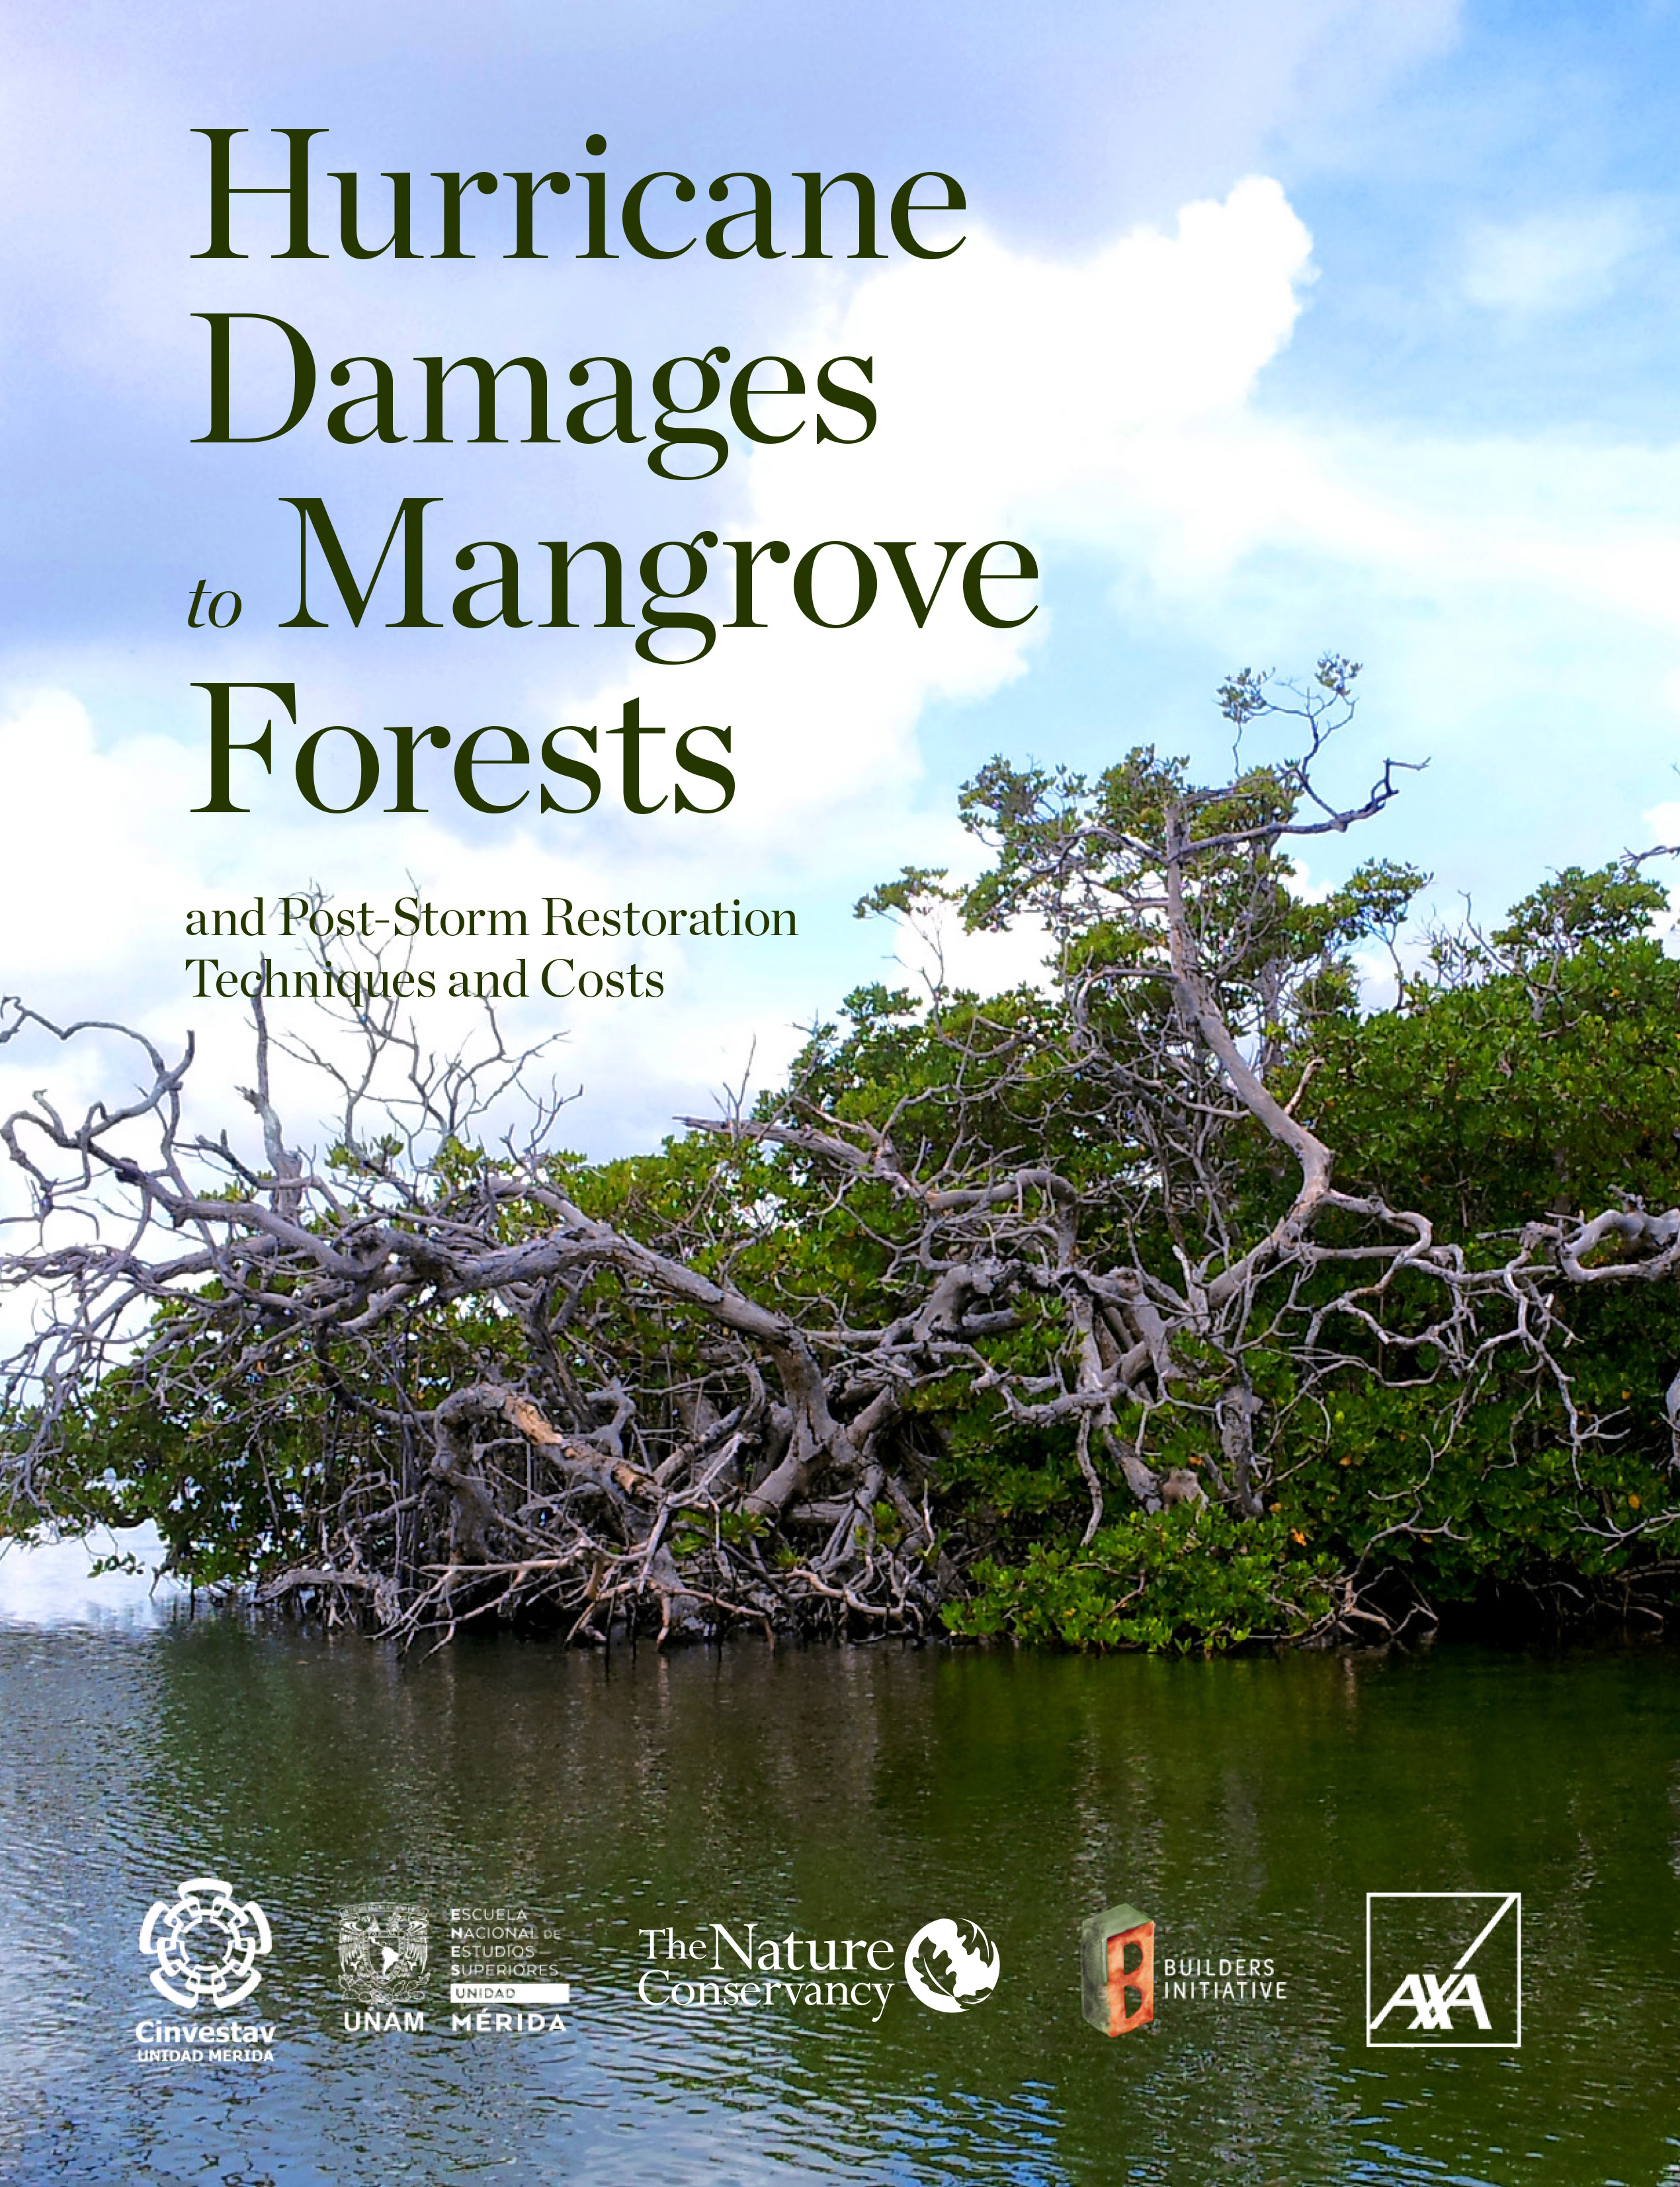 Cover of a TNC report called Hurricane Damages to Mangrove Forests and Post-Storm Restoration Techniques and Costs showing a large mangrove with tangled branches on the edge of a body of water.